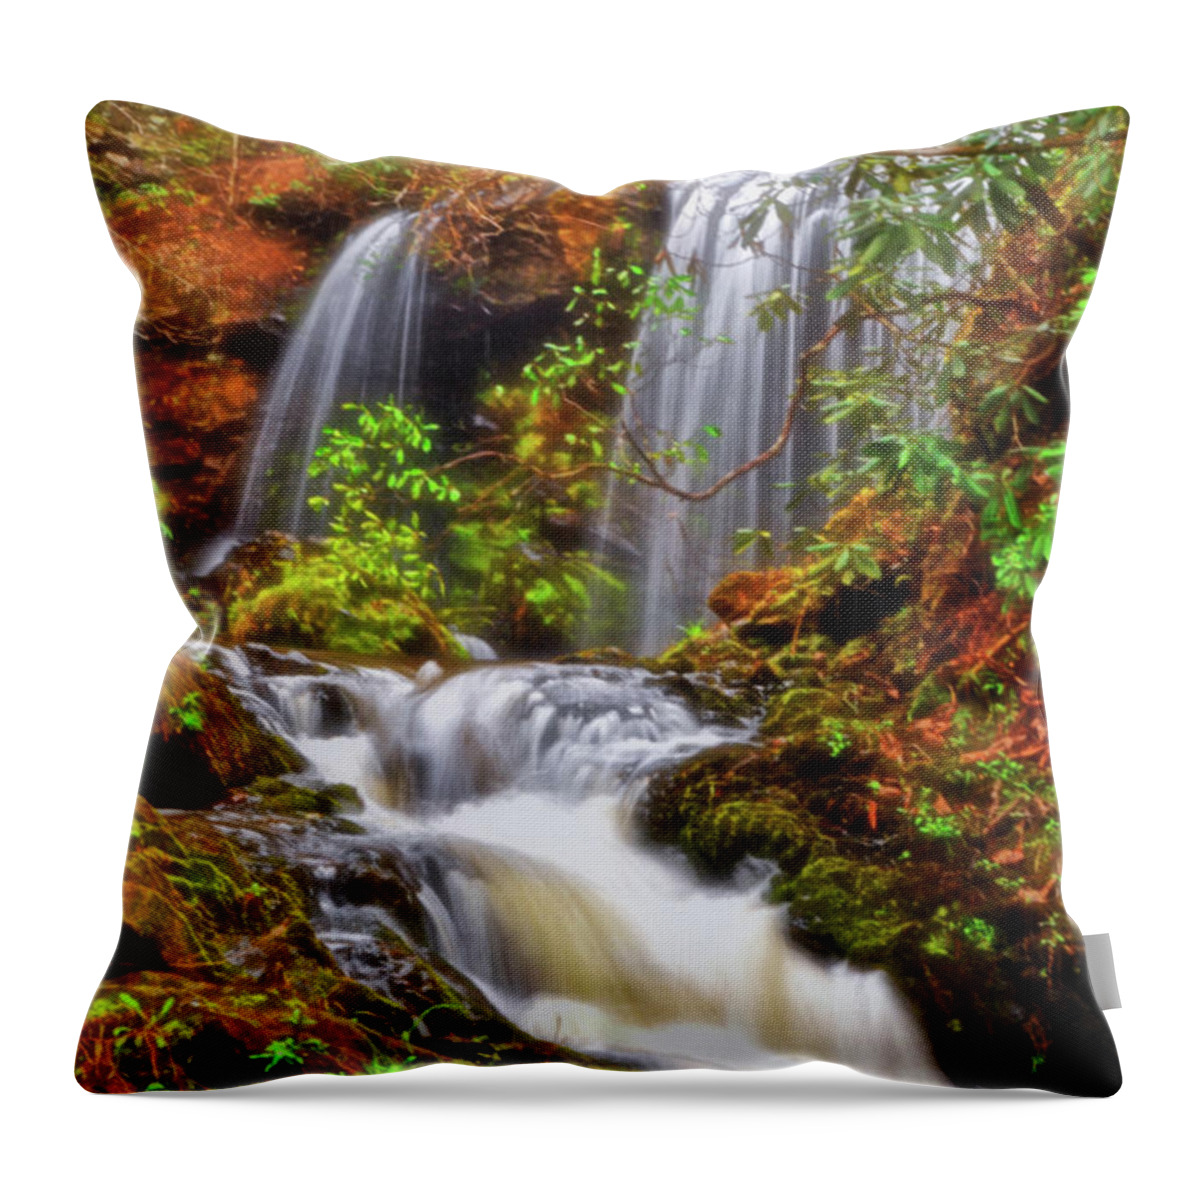 Waterfall Throw Pillow featuring the photograph Brasstown Falls 013 by George Bostian